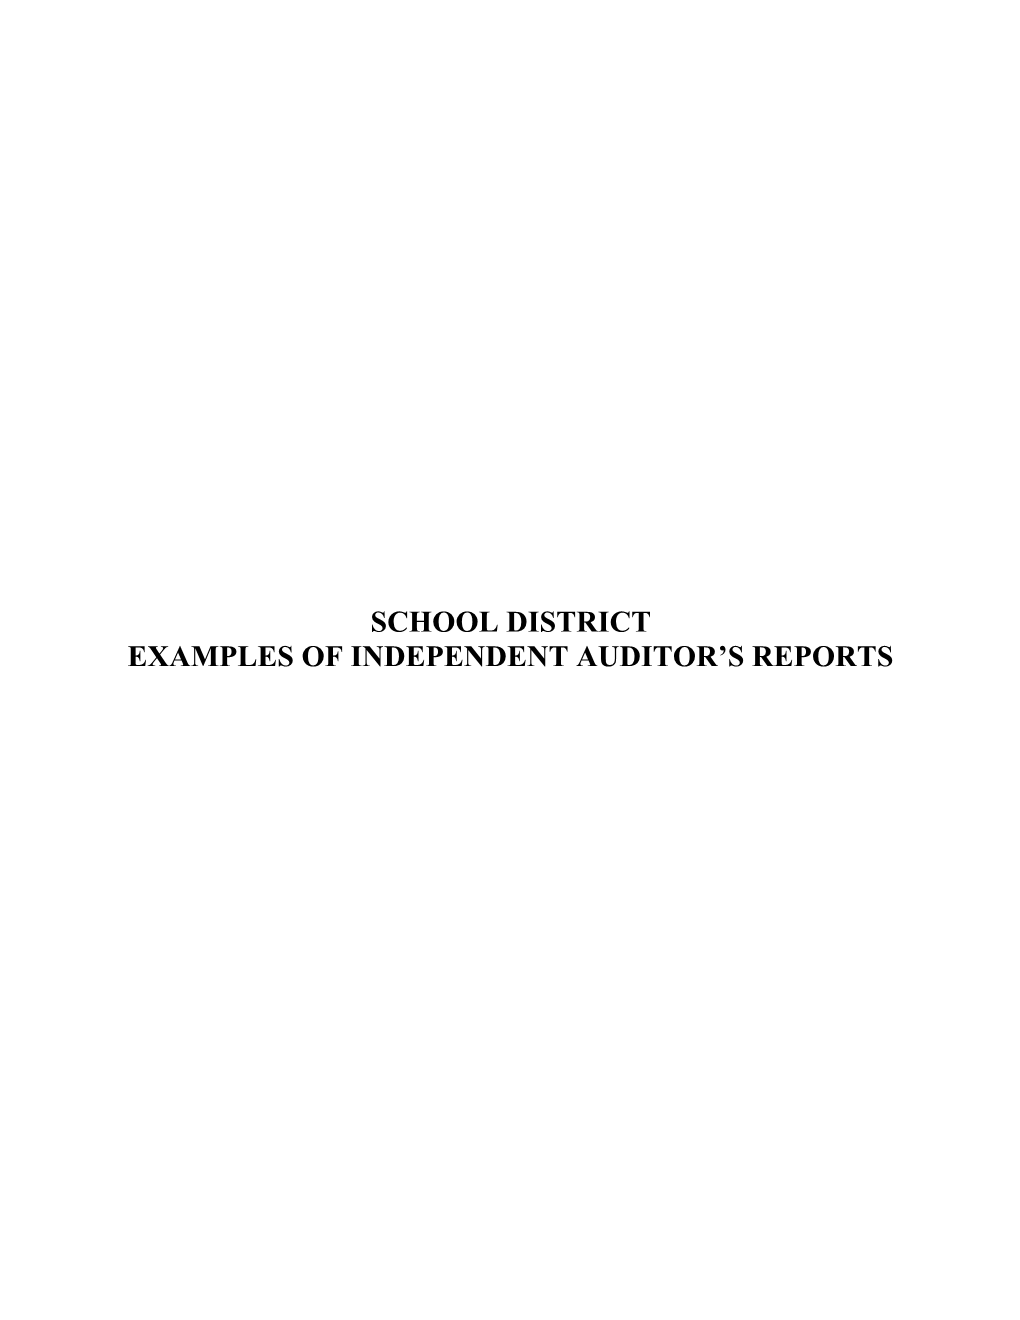 2009 Minnesota Legal Compliance Audit Guide for Local Governments Section 6